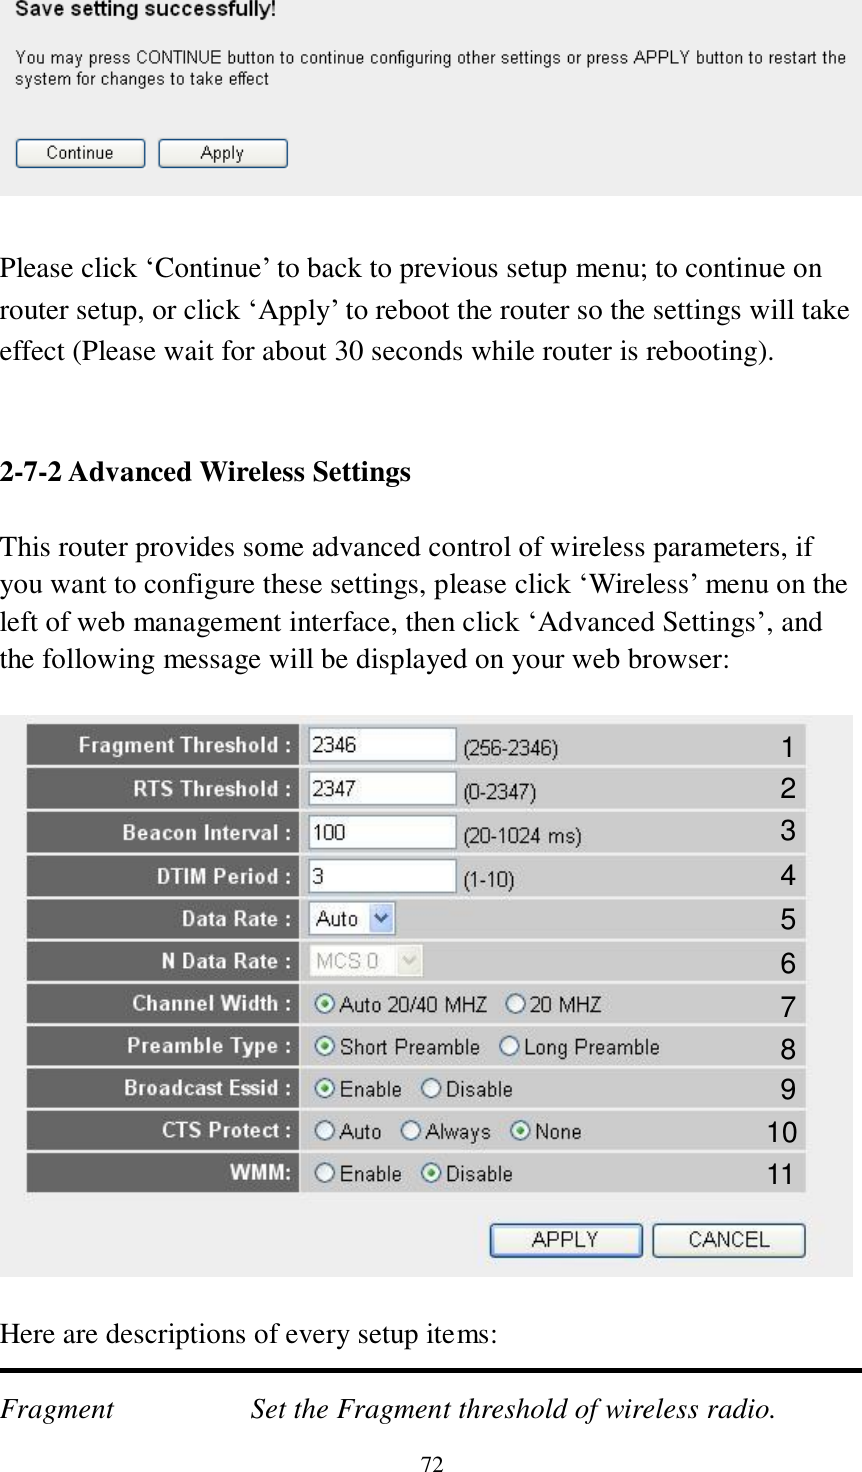 72   Please click „Continue‟ to back to previous setup menu; to continue on router setup, or click „Apply‟ to reboot the router so the settings will take effect (Please wait for about 30 seconds while router is rebooting).   2-7-2 Advanced Wireless Settings  This router provides some advanced control of wireless parameters, if you want to configure these settings, please click „Wireless‟ menu on the left of web management interface, then click „Advanced Settings‟, and the following message will be displayed on your web browser:    Here are descriptions of every setup items:  Fragment  Set the Fragment threshold of wireless radio.    1 2 3 4 5 7 8 6 9 10 11 